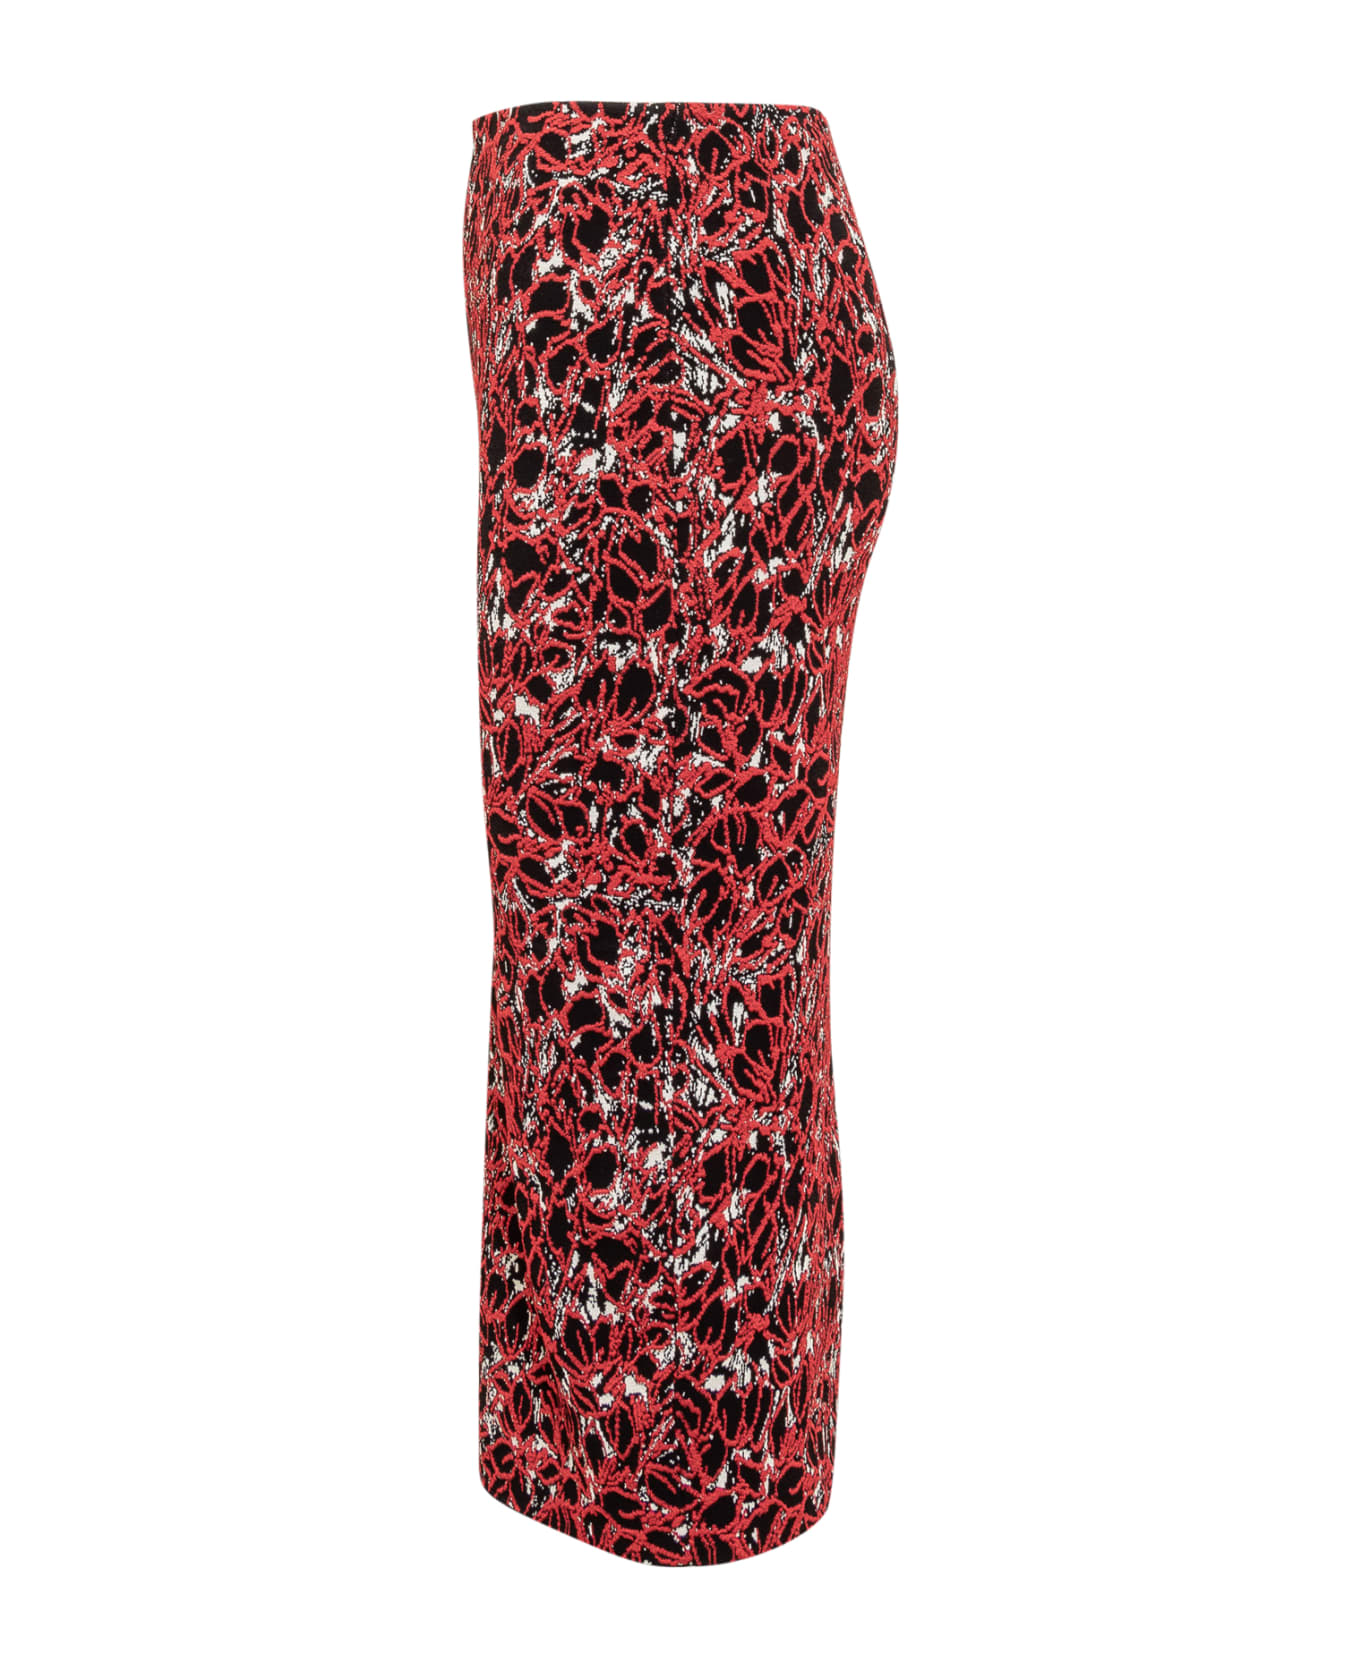 Del Core Knitted Midi Skirt - BLACK/RED